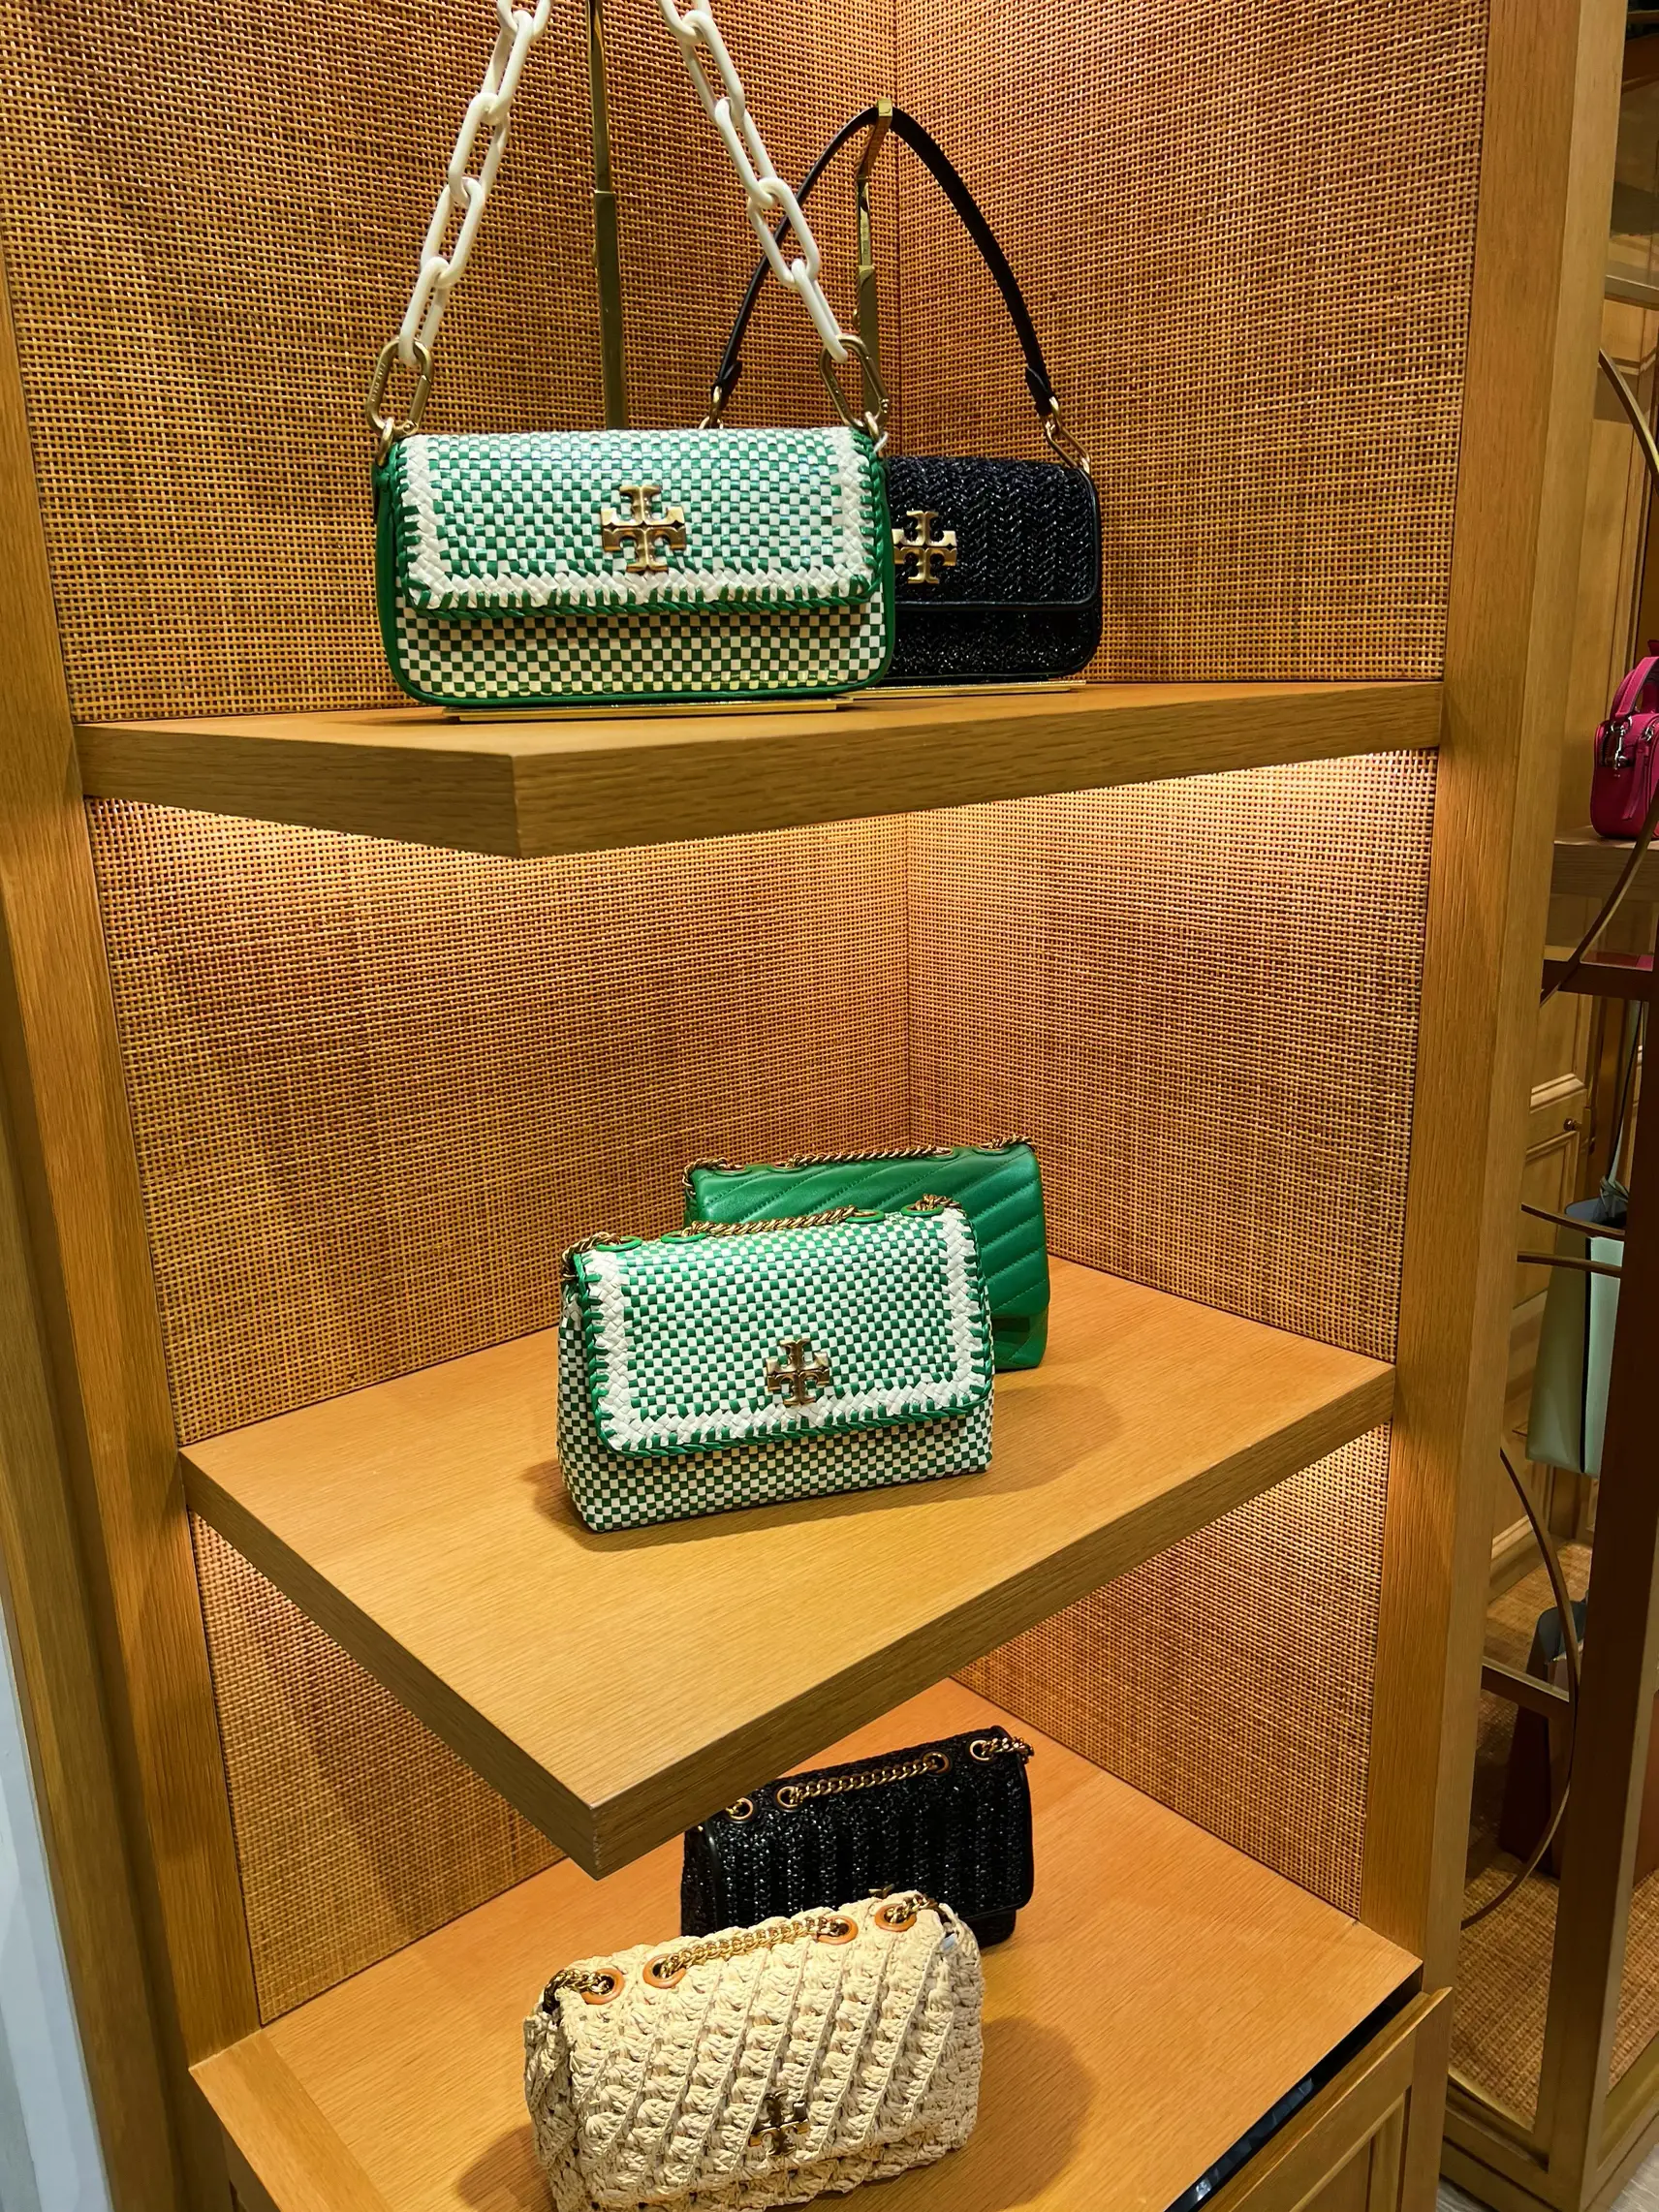 Tory Burch Celebrates Its First Store In Malaysia